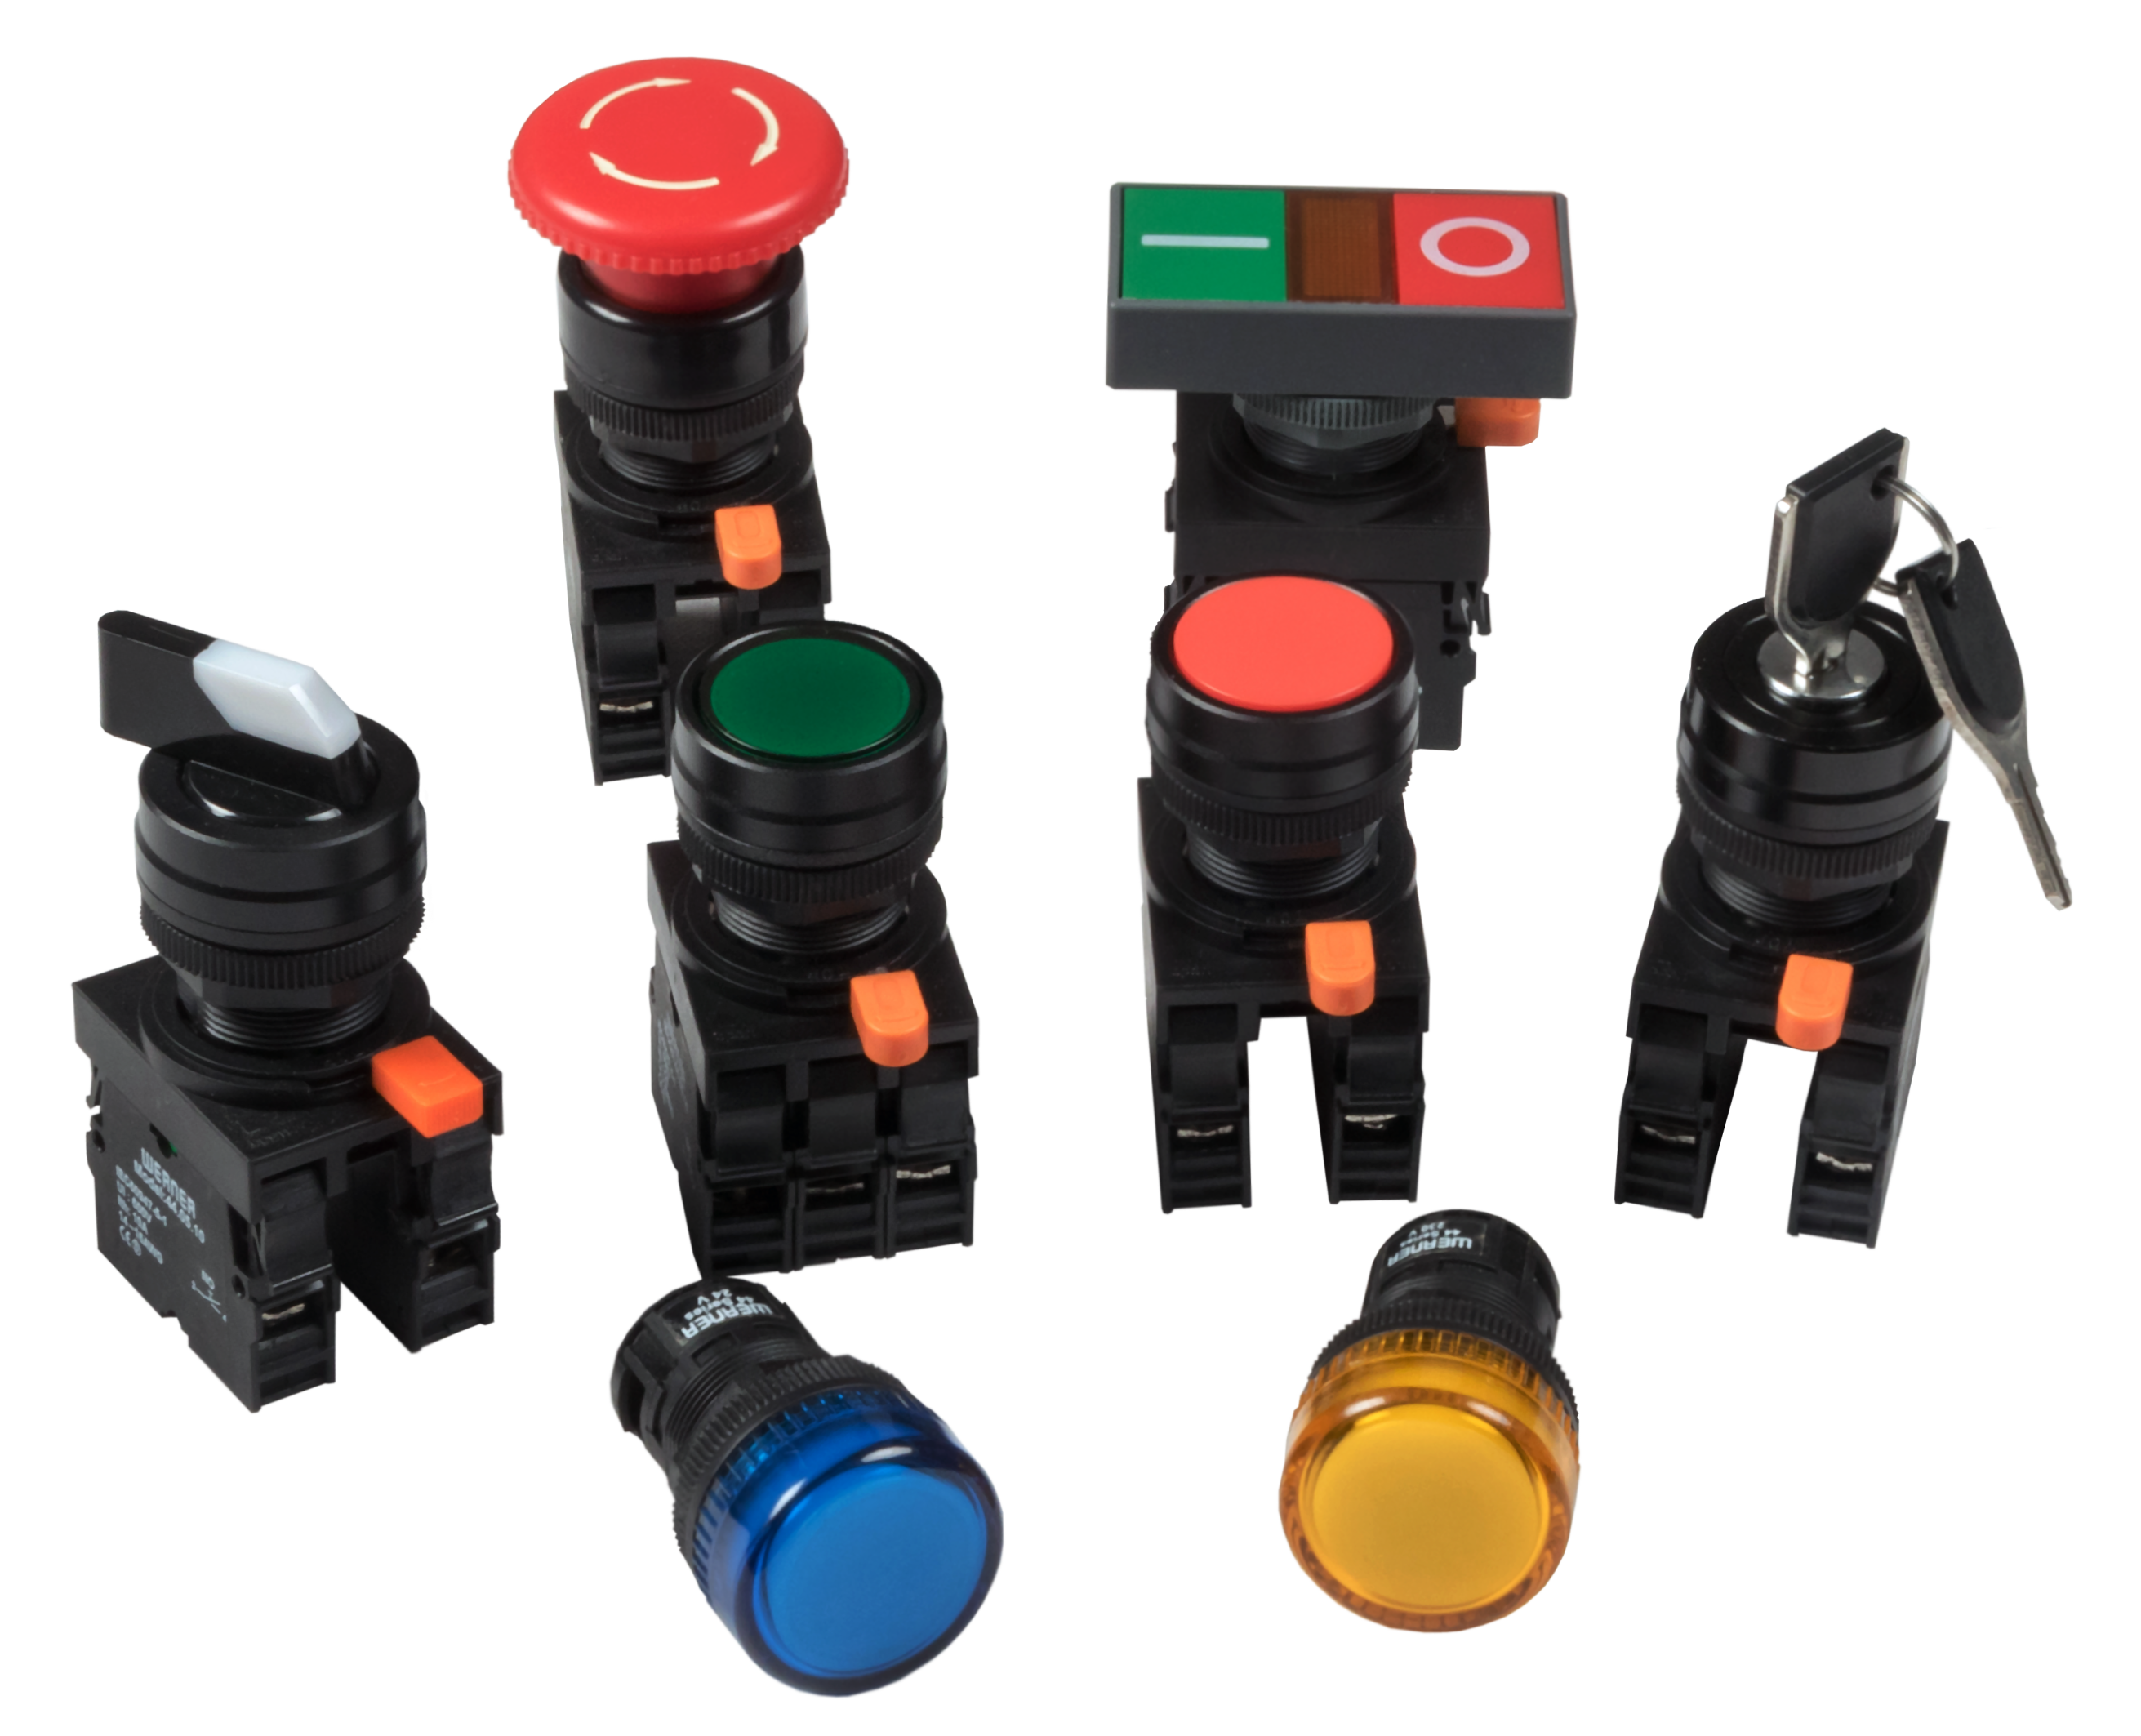 Werner 41 Series Pushbutton Switches